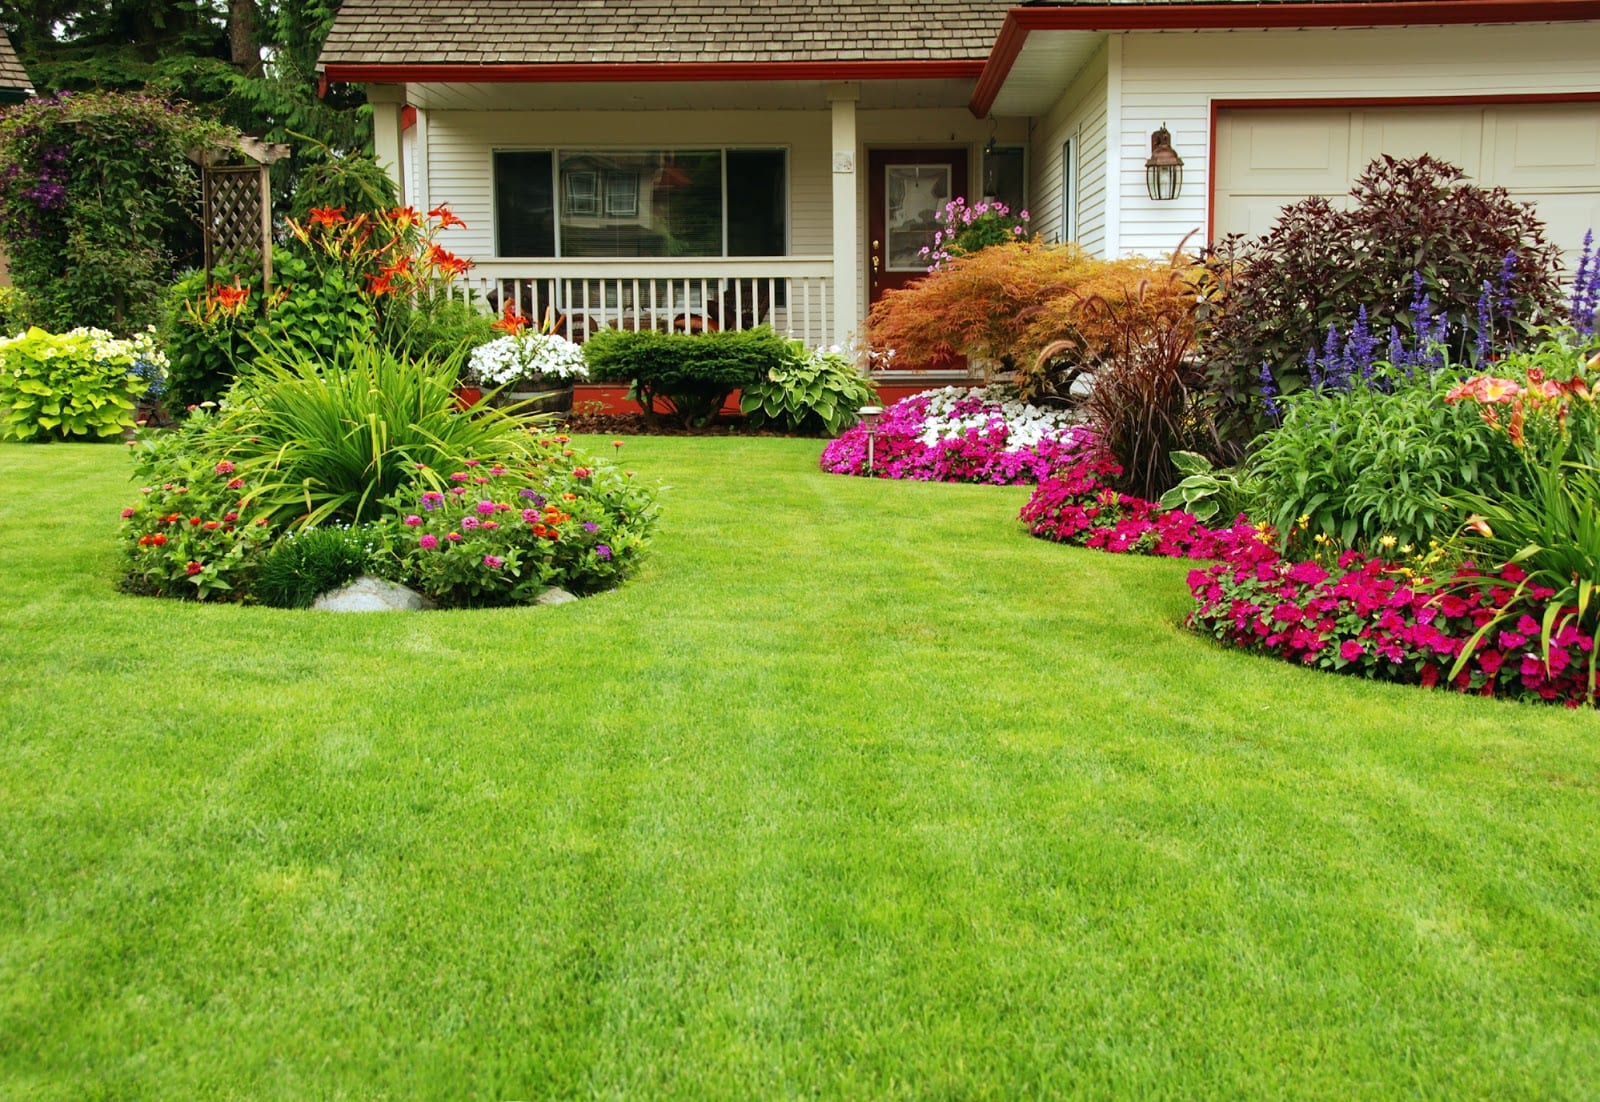 Exterior of a suburban home with a healthy green lawn and manicured flower beds in bloom.